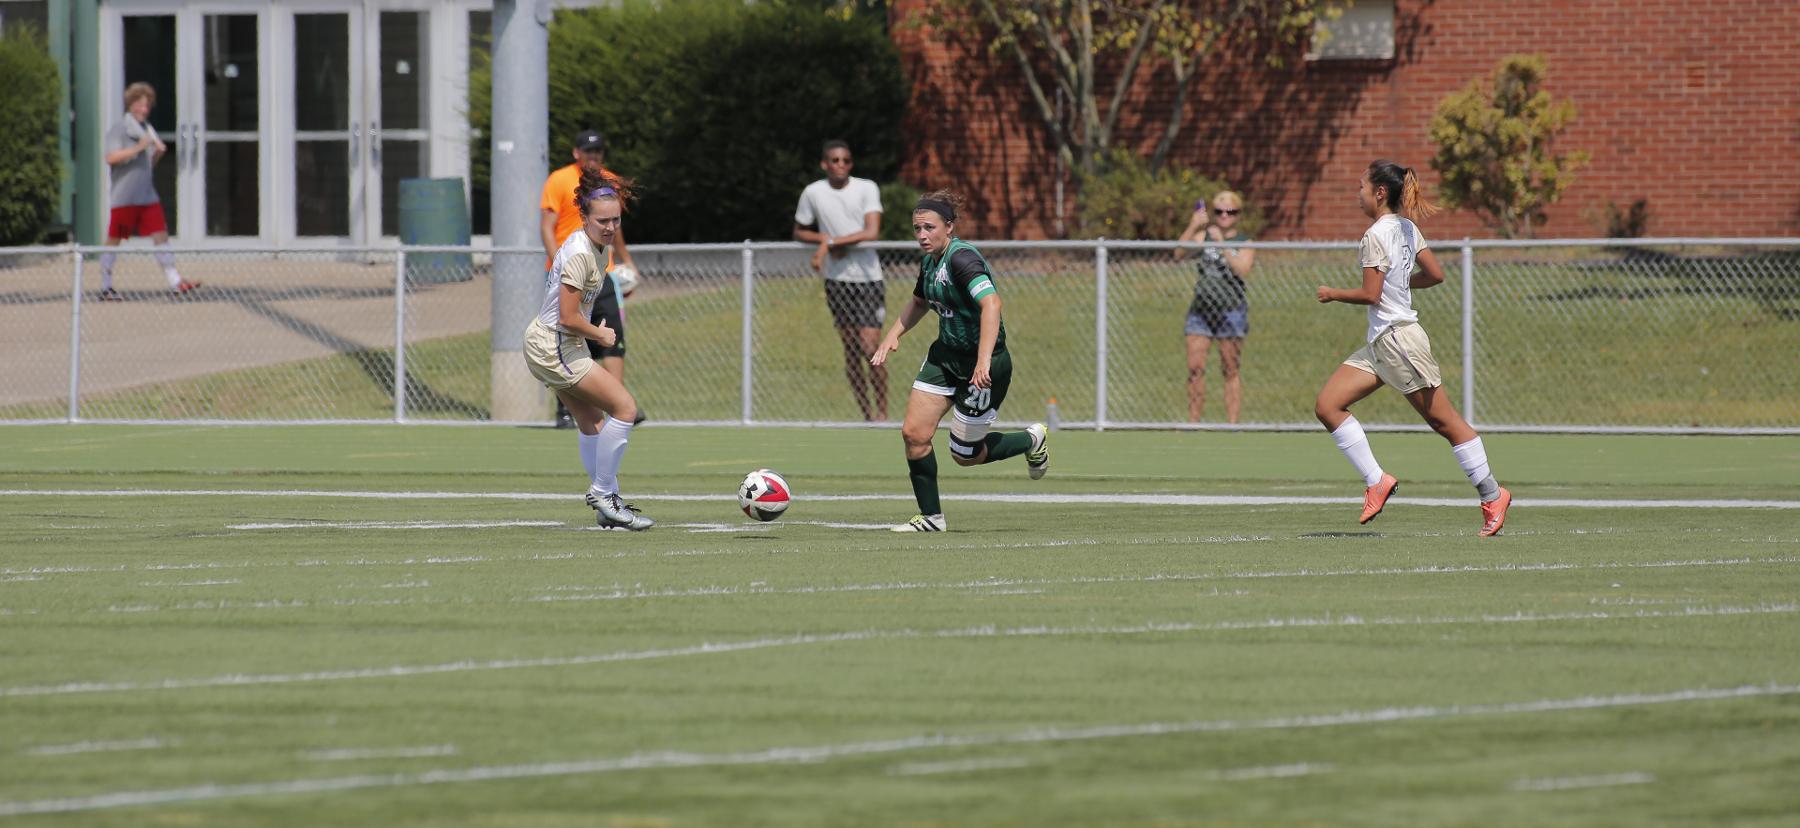 Bison battle in 1-0 loss to Westminster